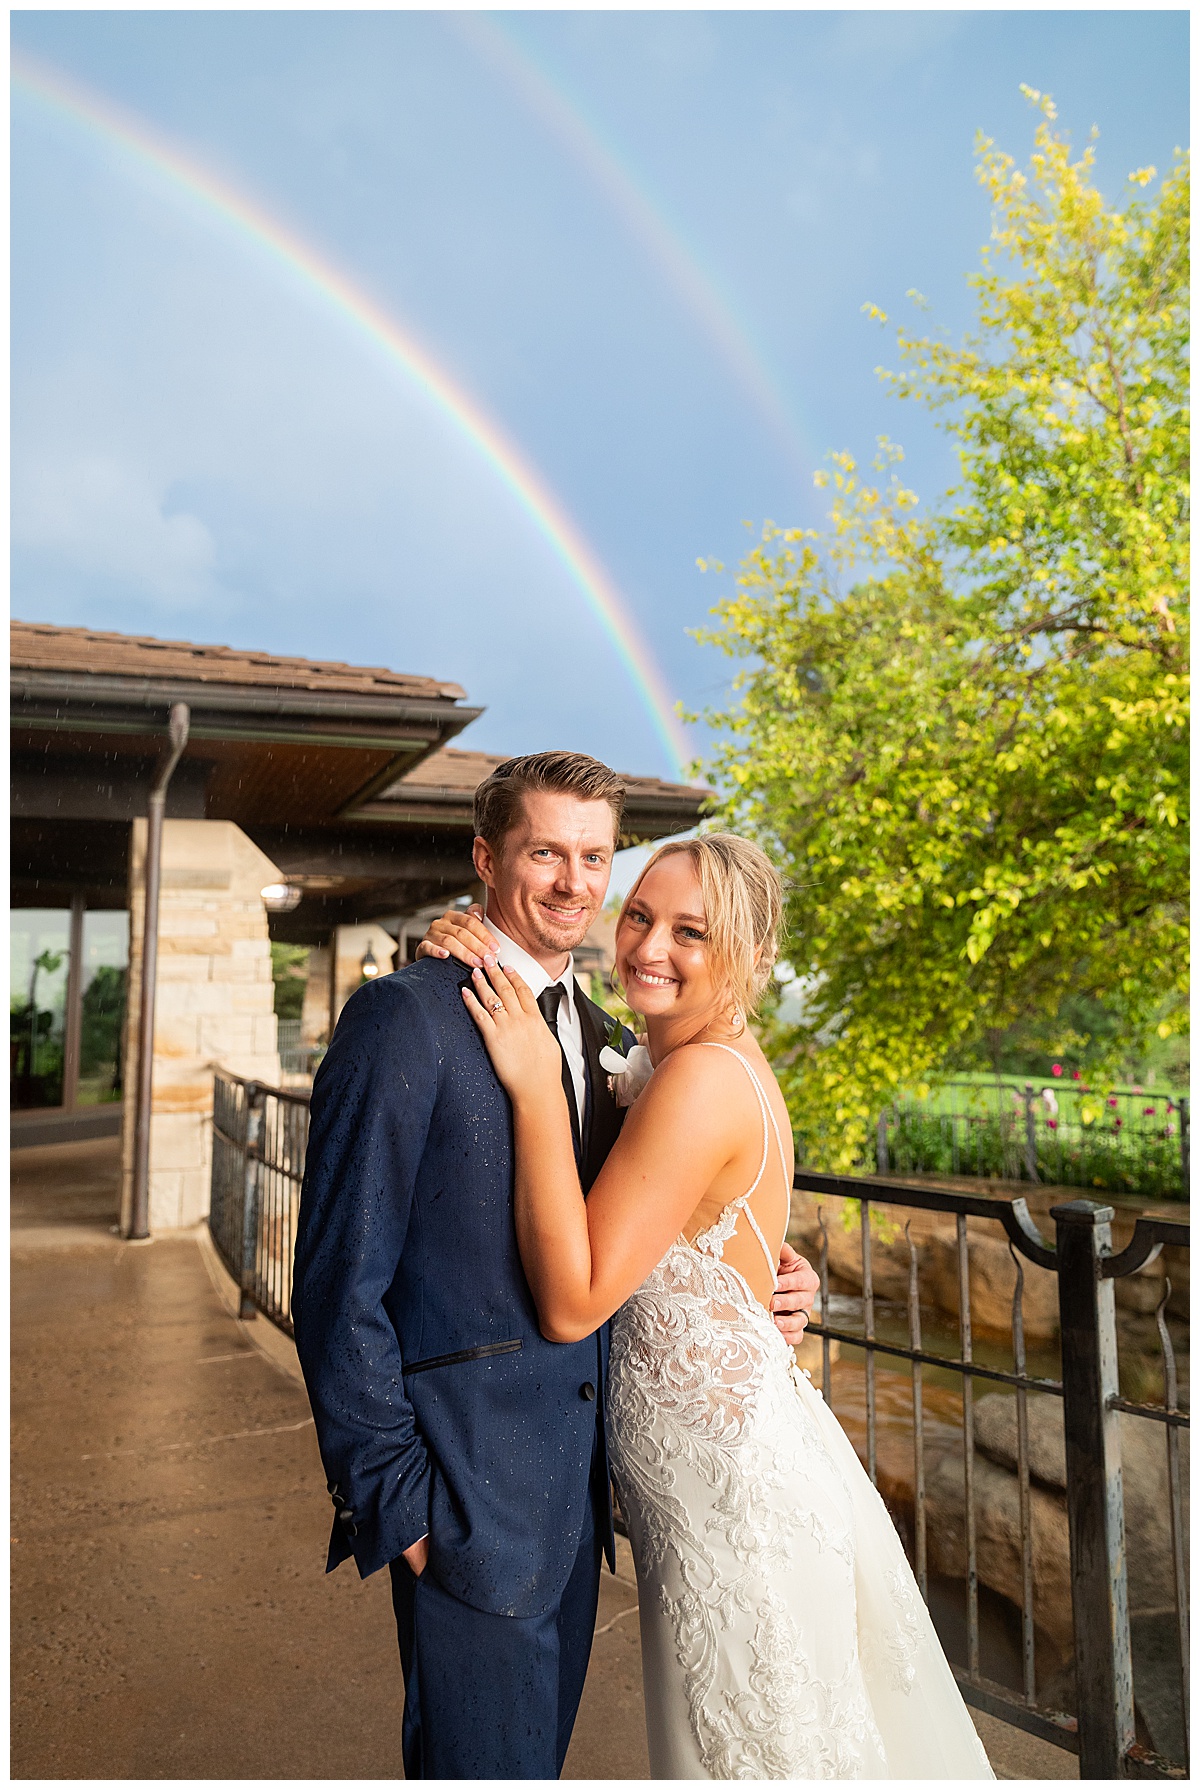 A bride in a white dress and a groom in a navy suit pose in the rain in front of a double rainbow on their wedding day